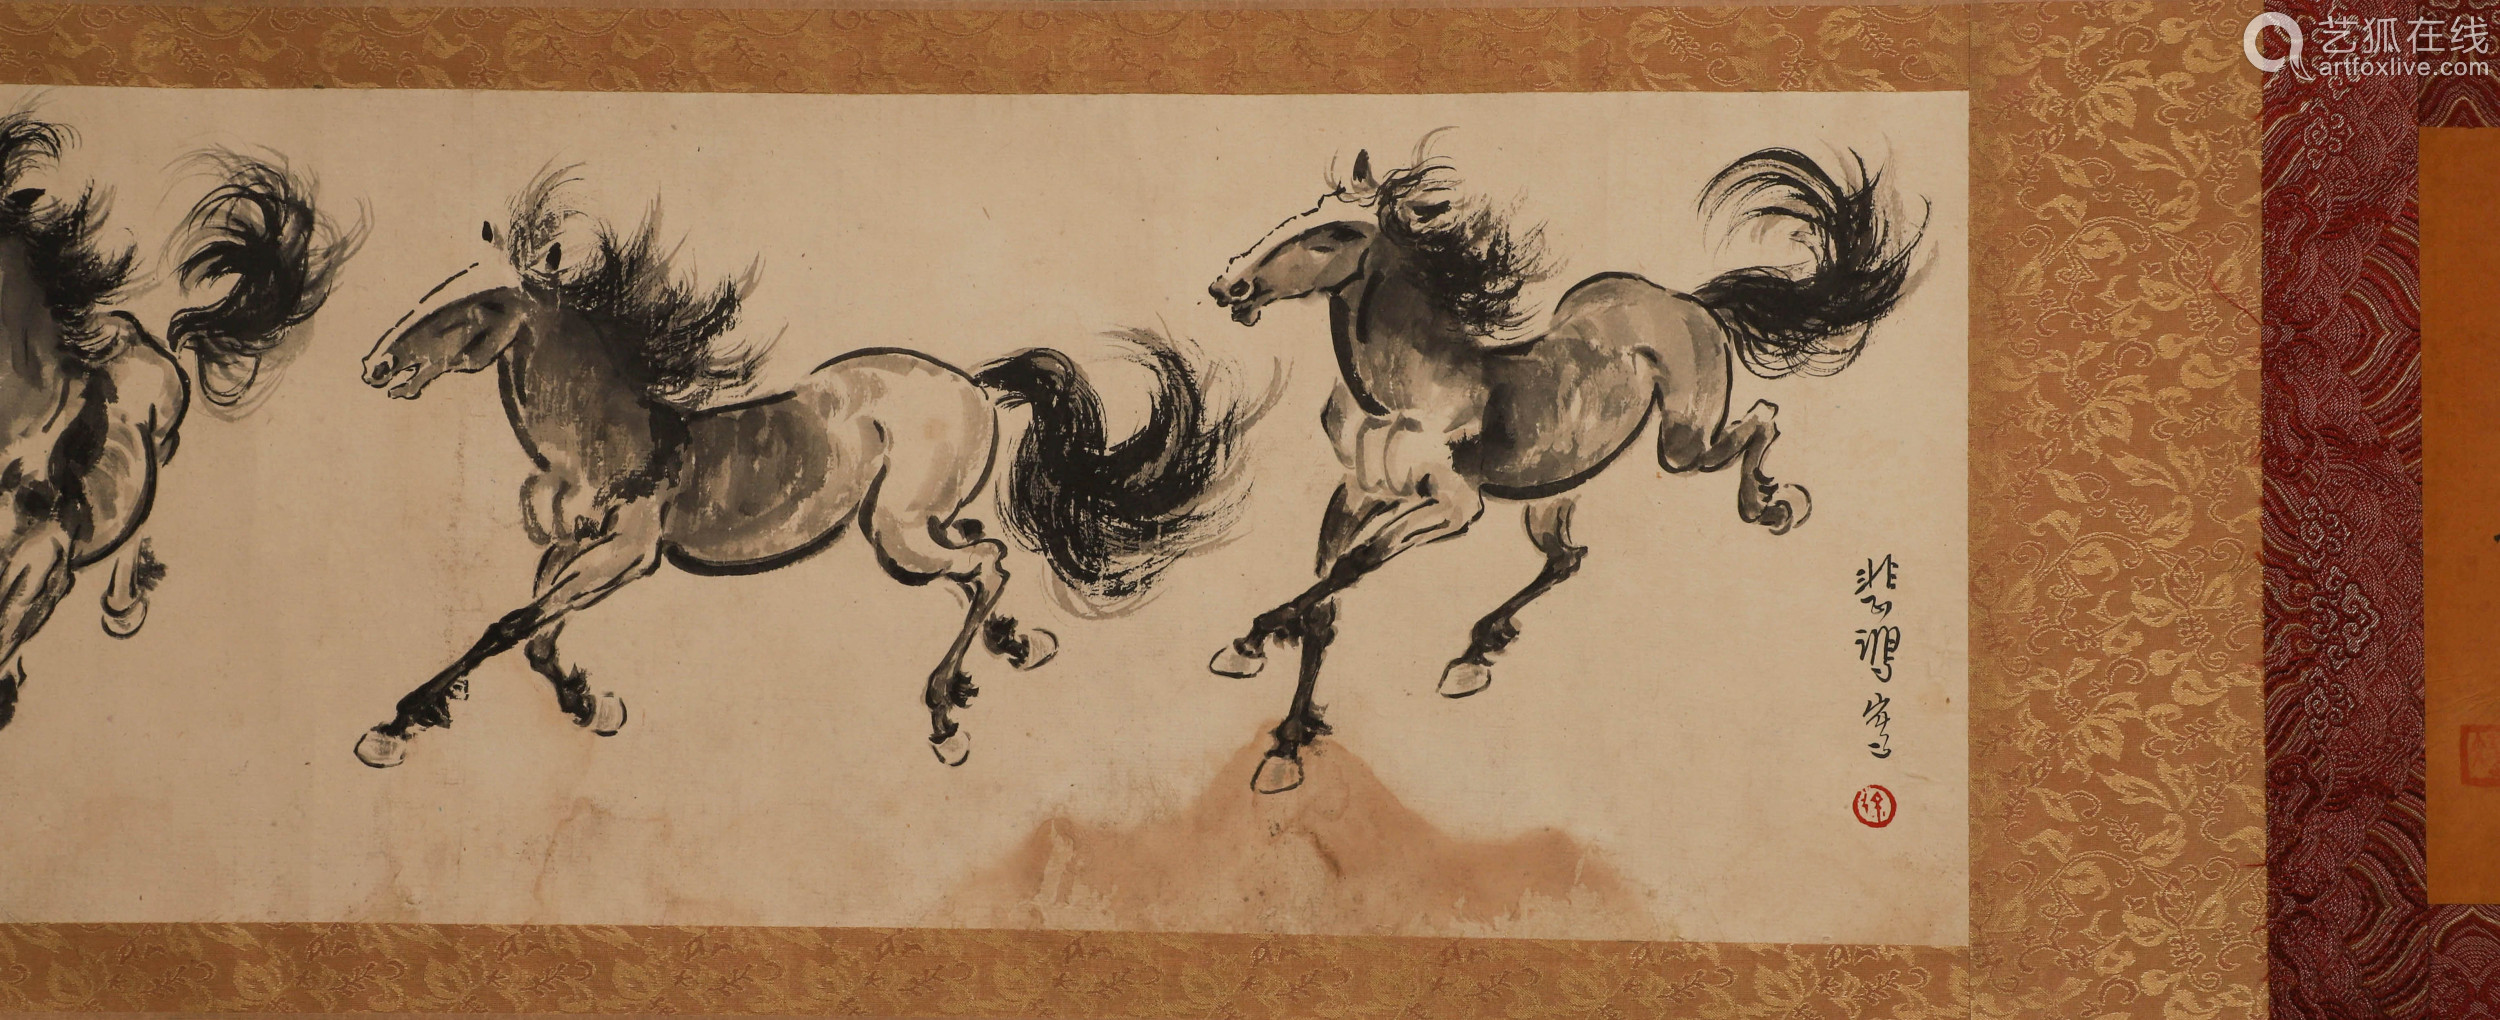 Long scroll of Xu Beihong's galloping horse in Chinese ink p...